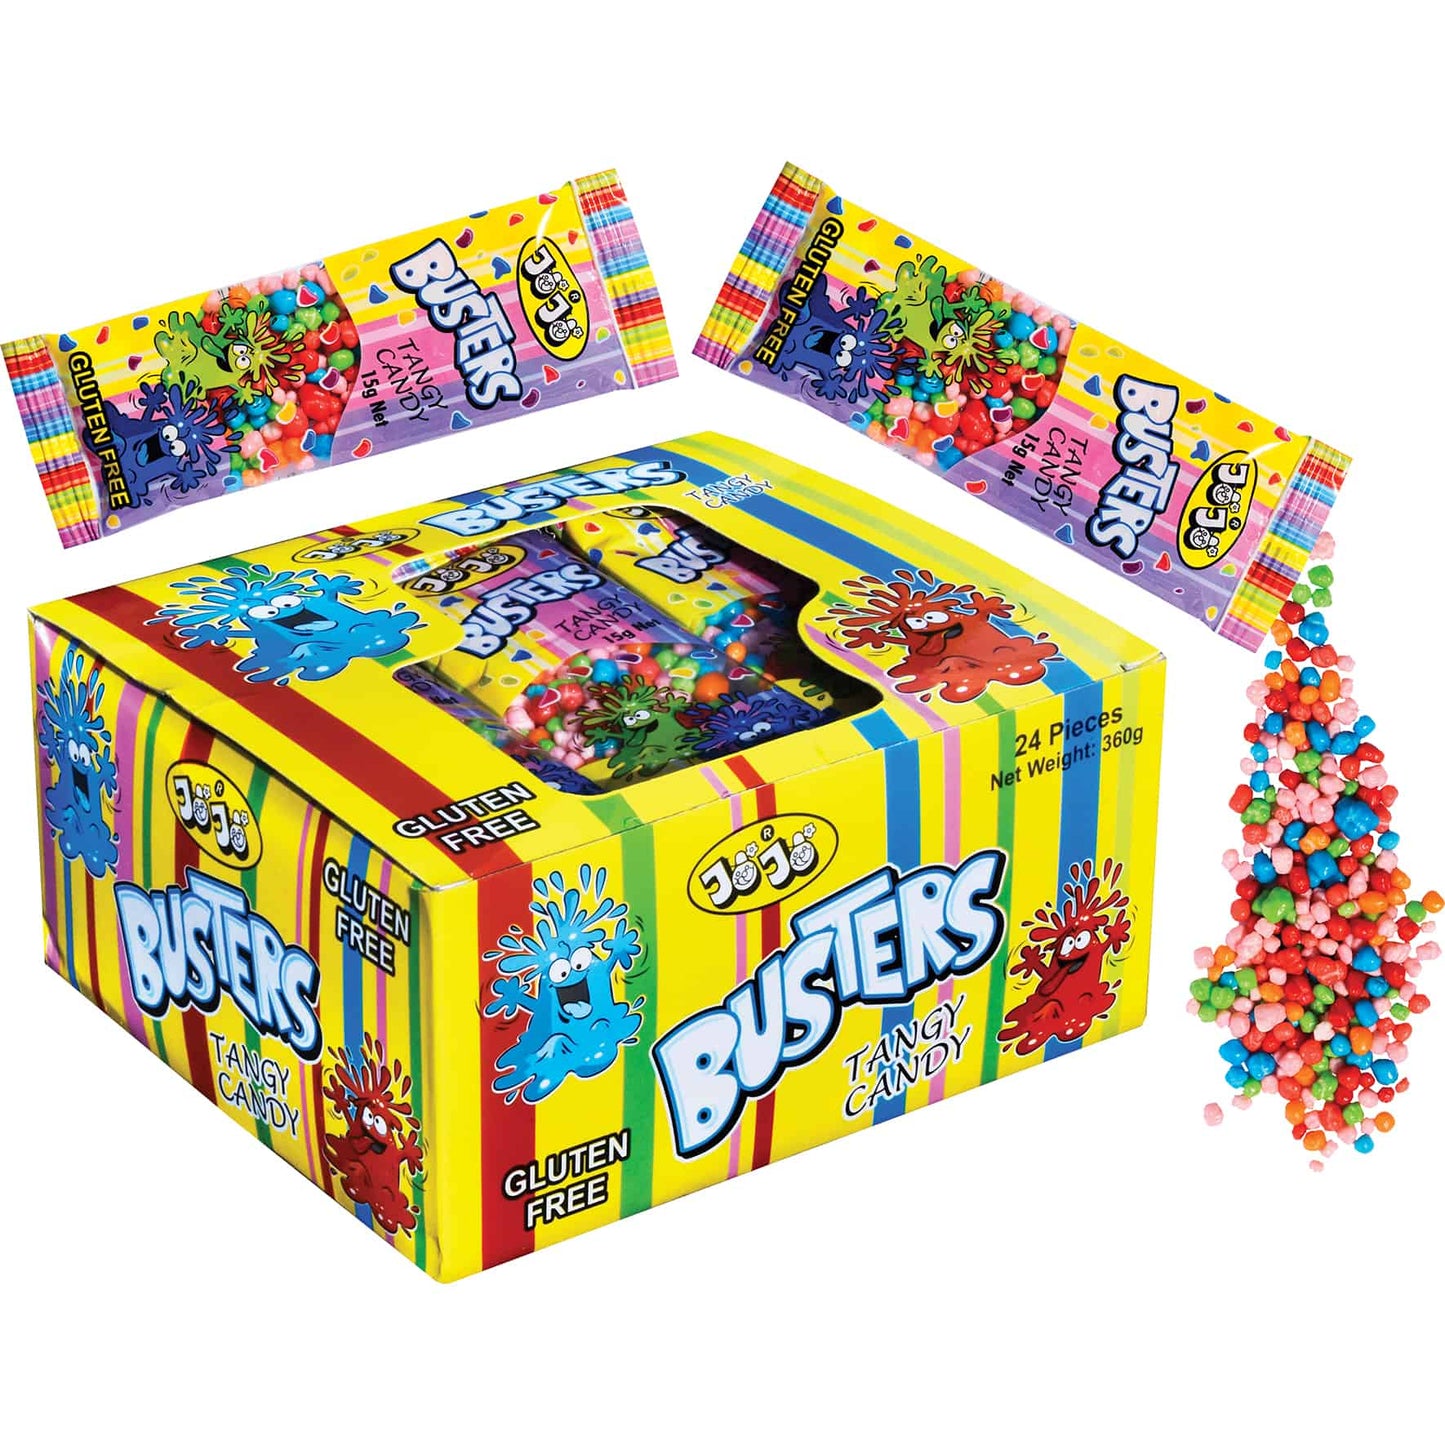 Busters Tangy Candy